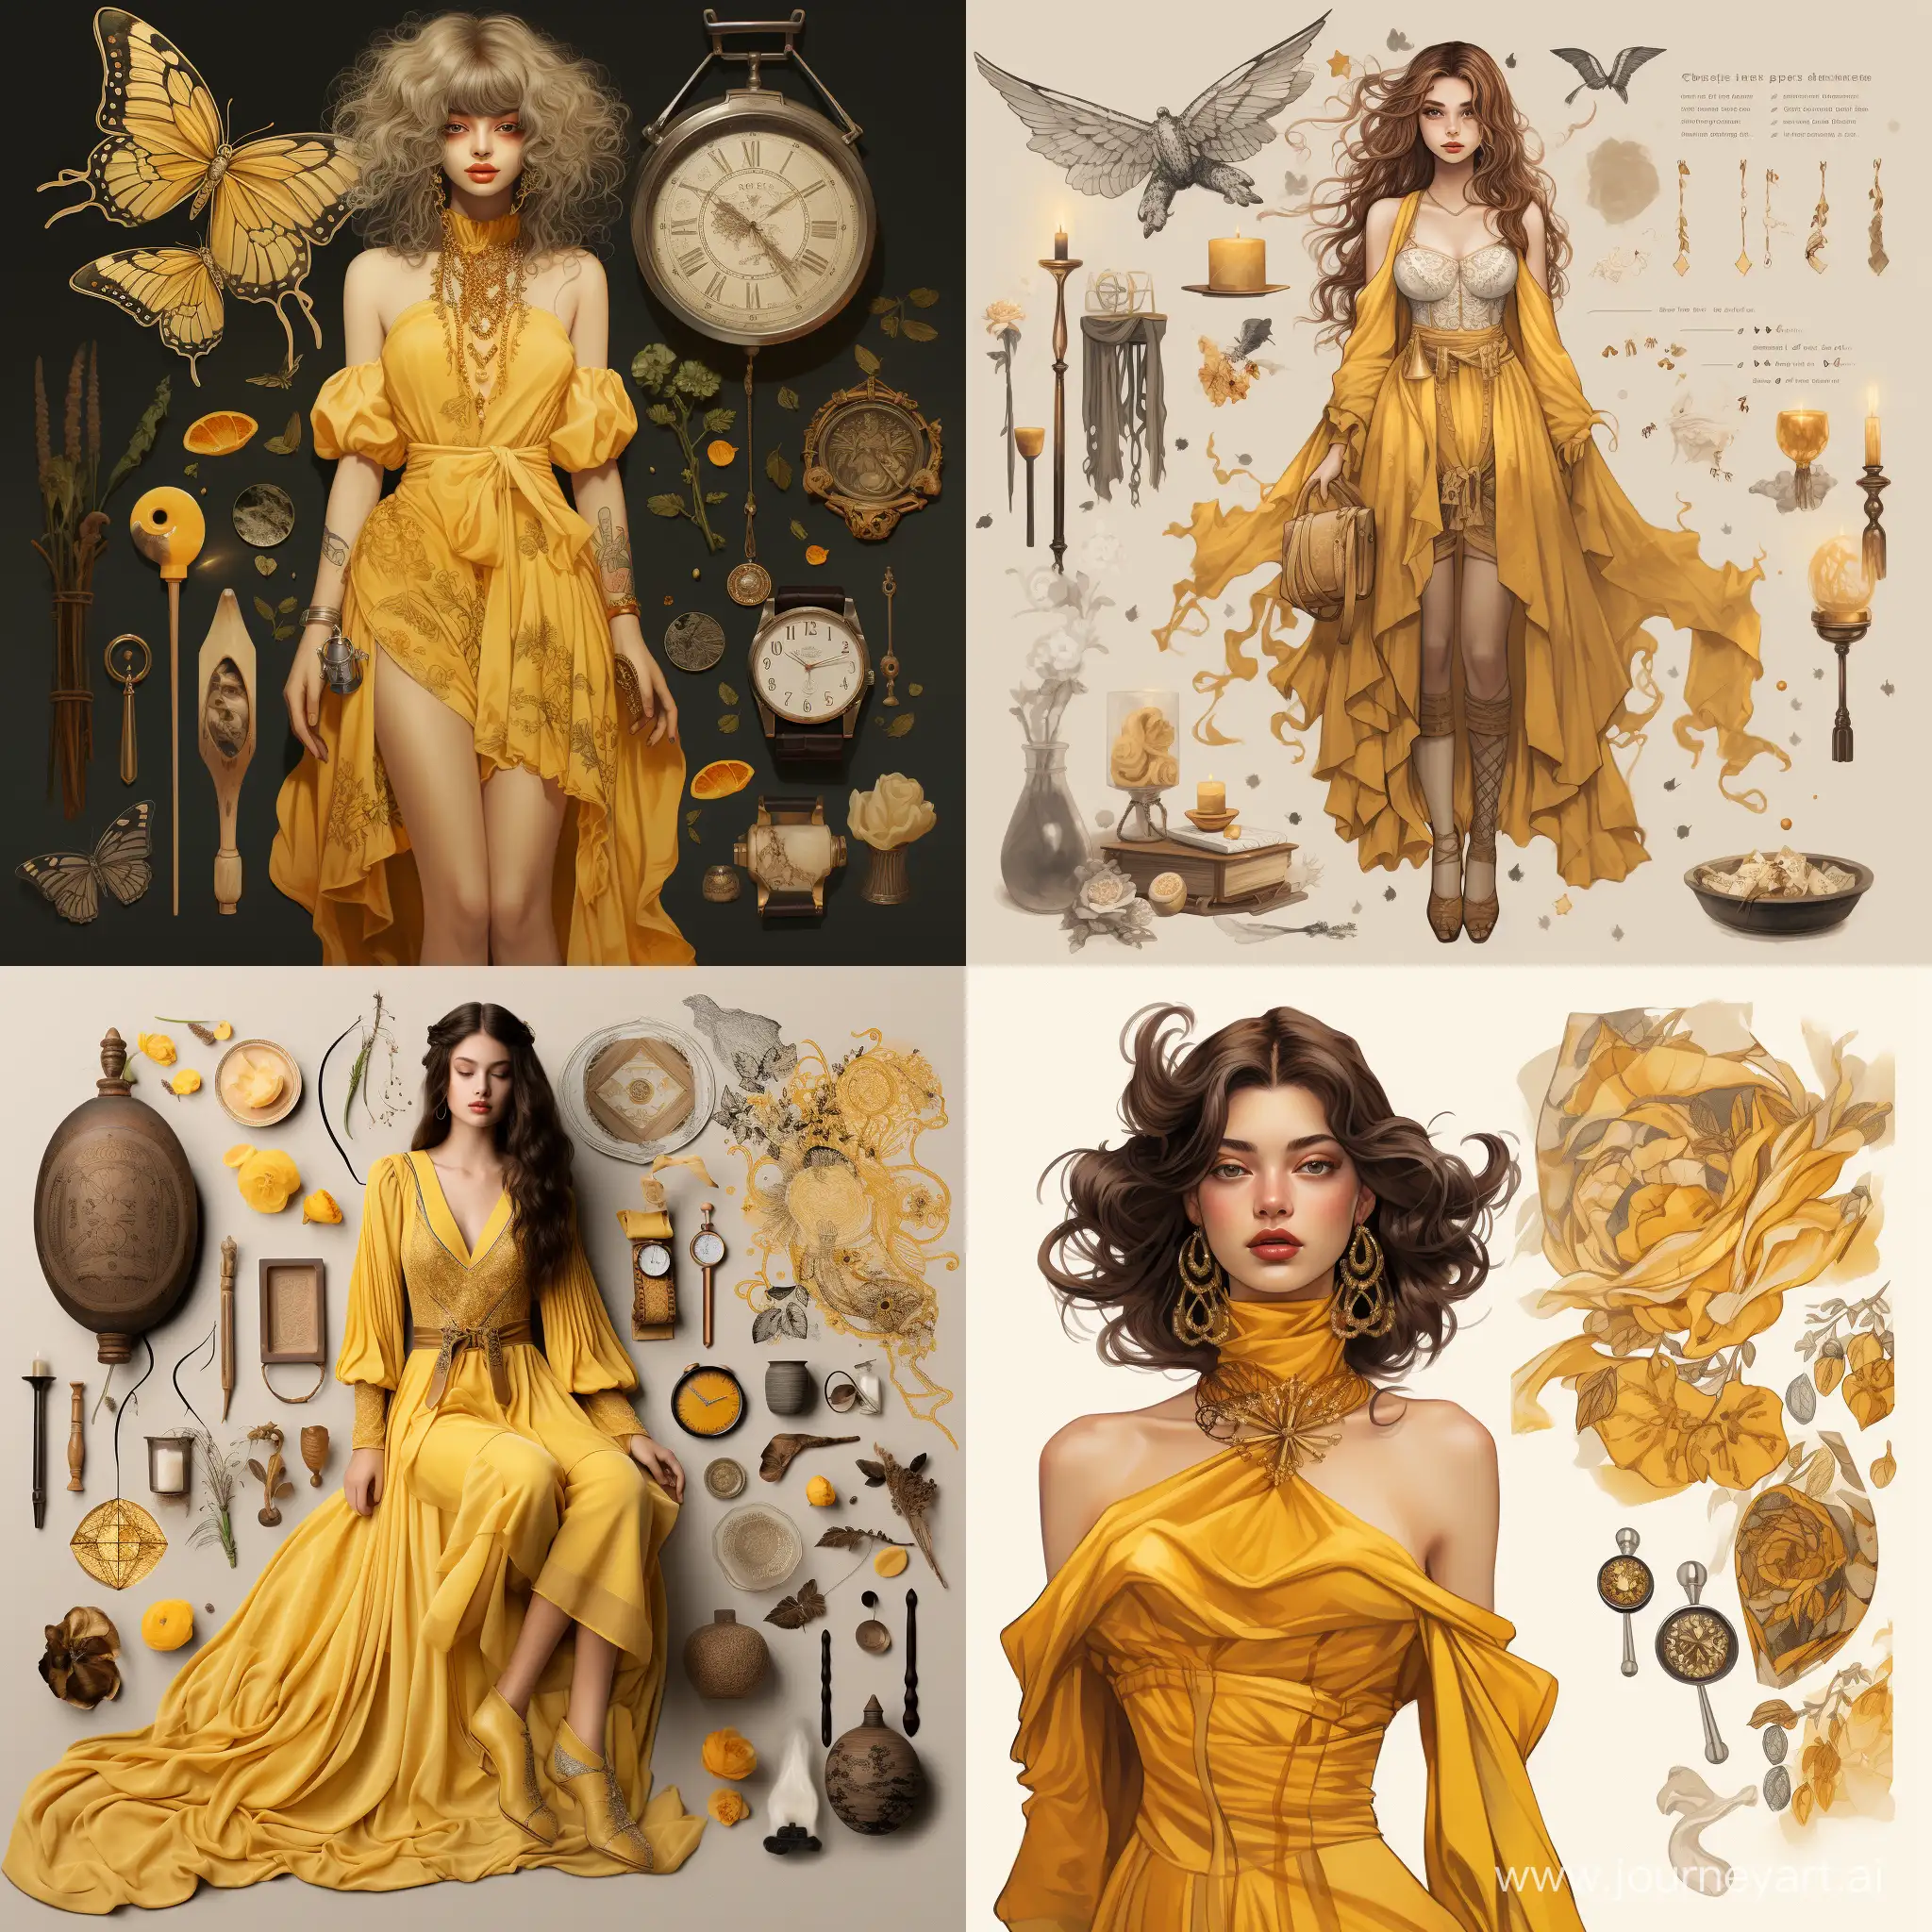 Enchanting-Fantasy-Character-with-Yellow-Patterned-Dress-and-Accessories